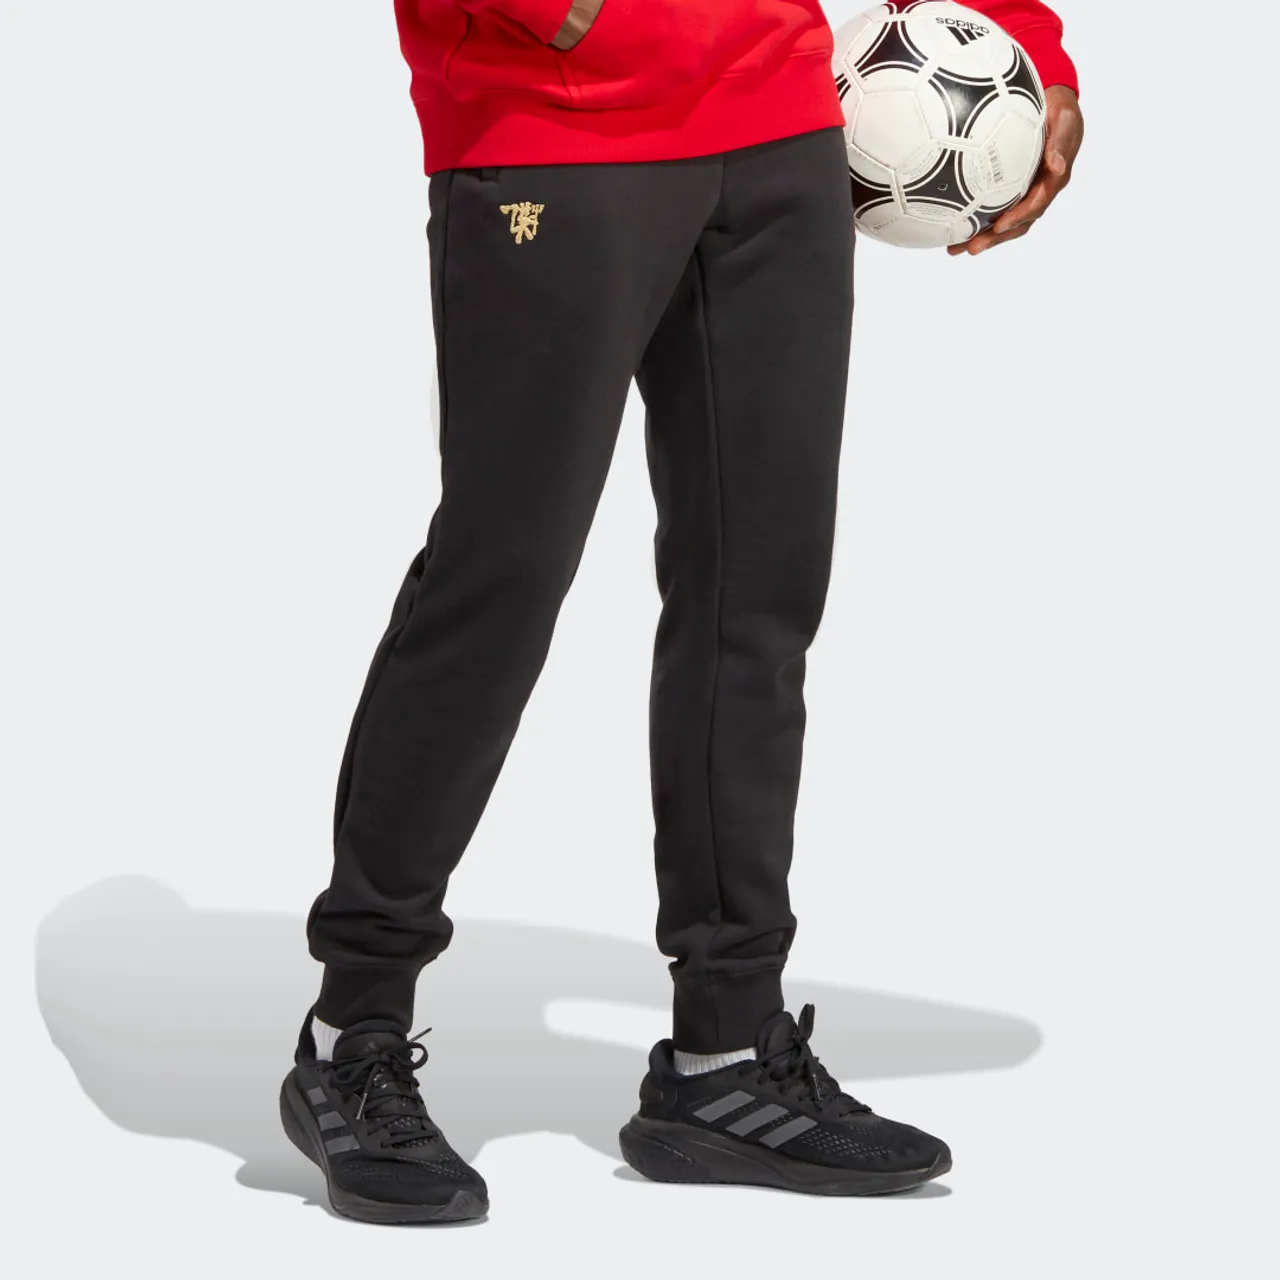 Manchester United Chinese Story Pants